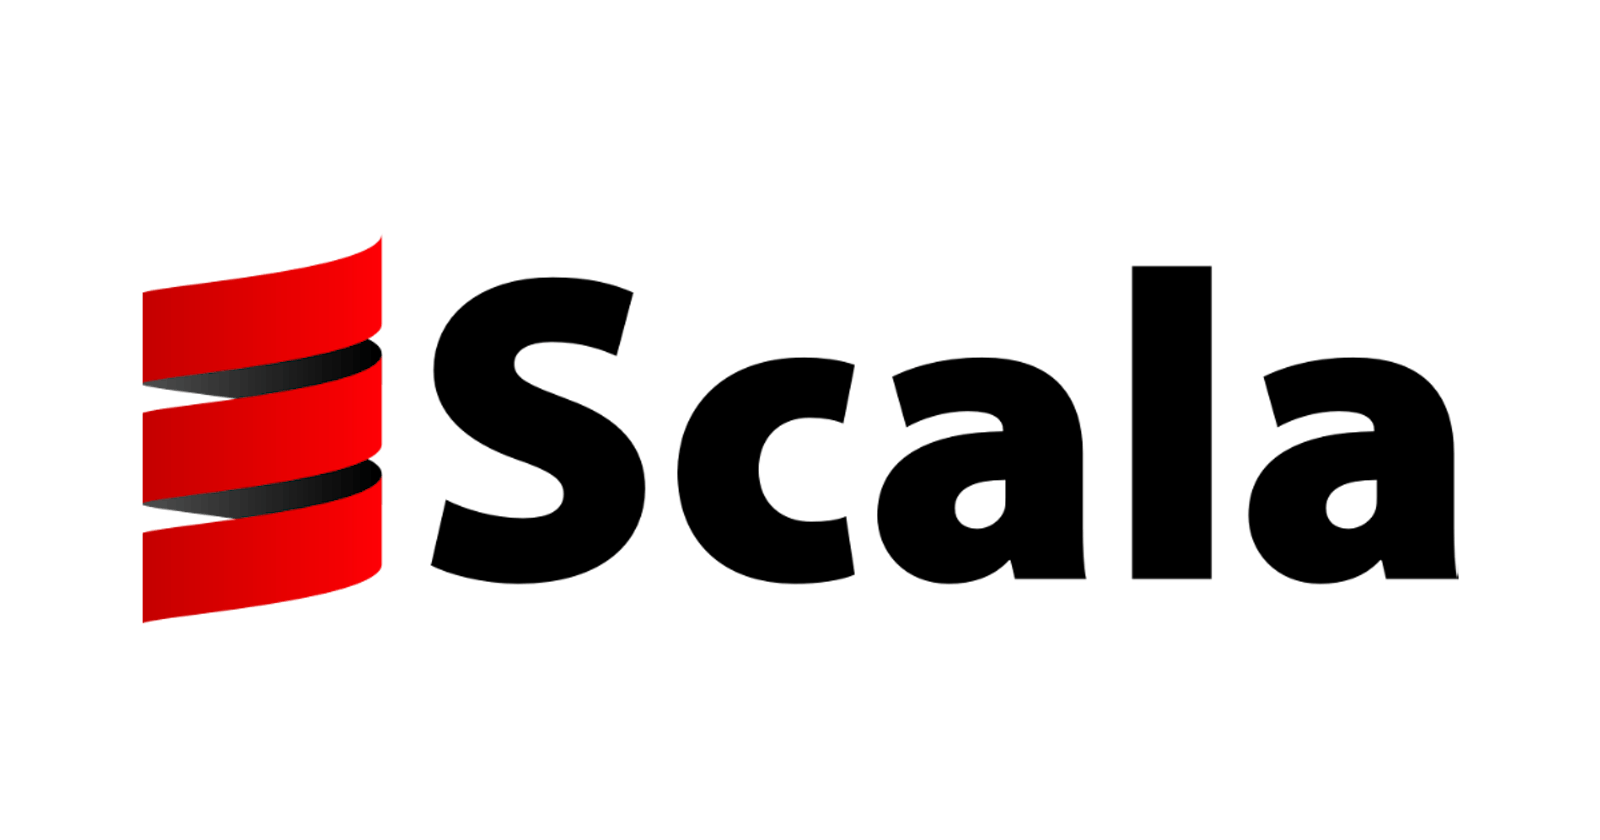 The Scala Programming Language And Why Should Care